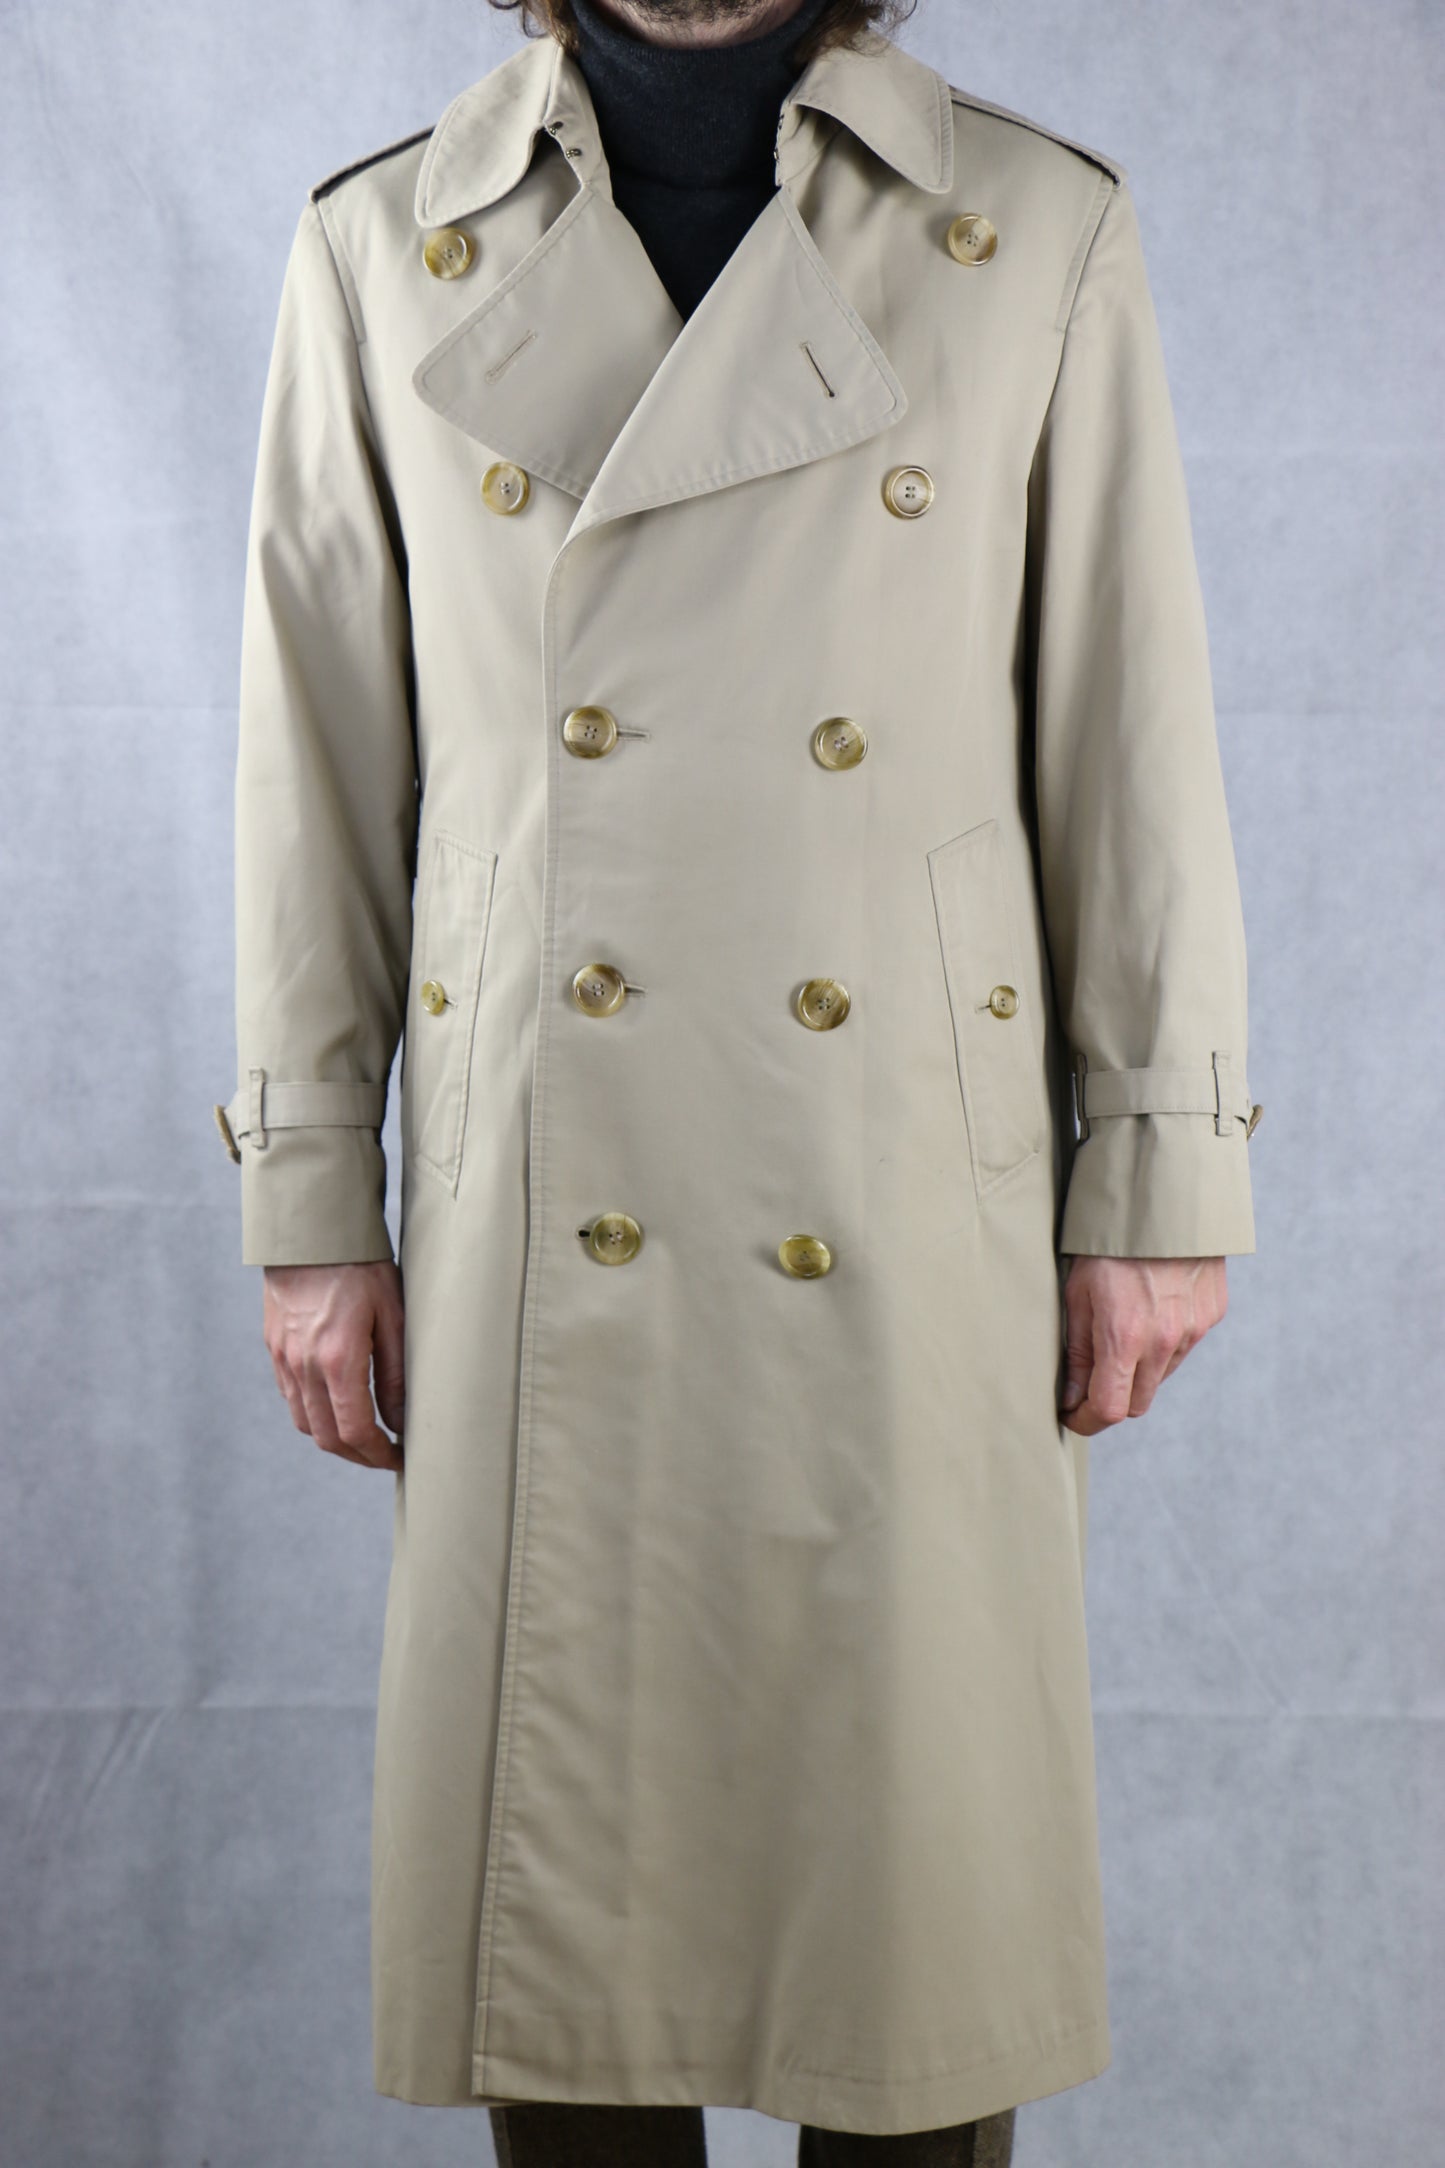 Burberrys' Trench Coat 'Made in England' for Fumagalli, clochard92.com